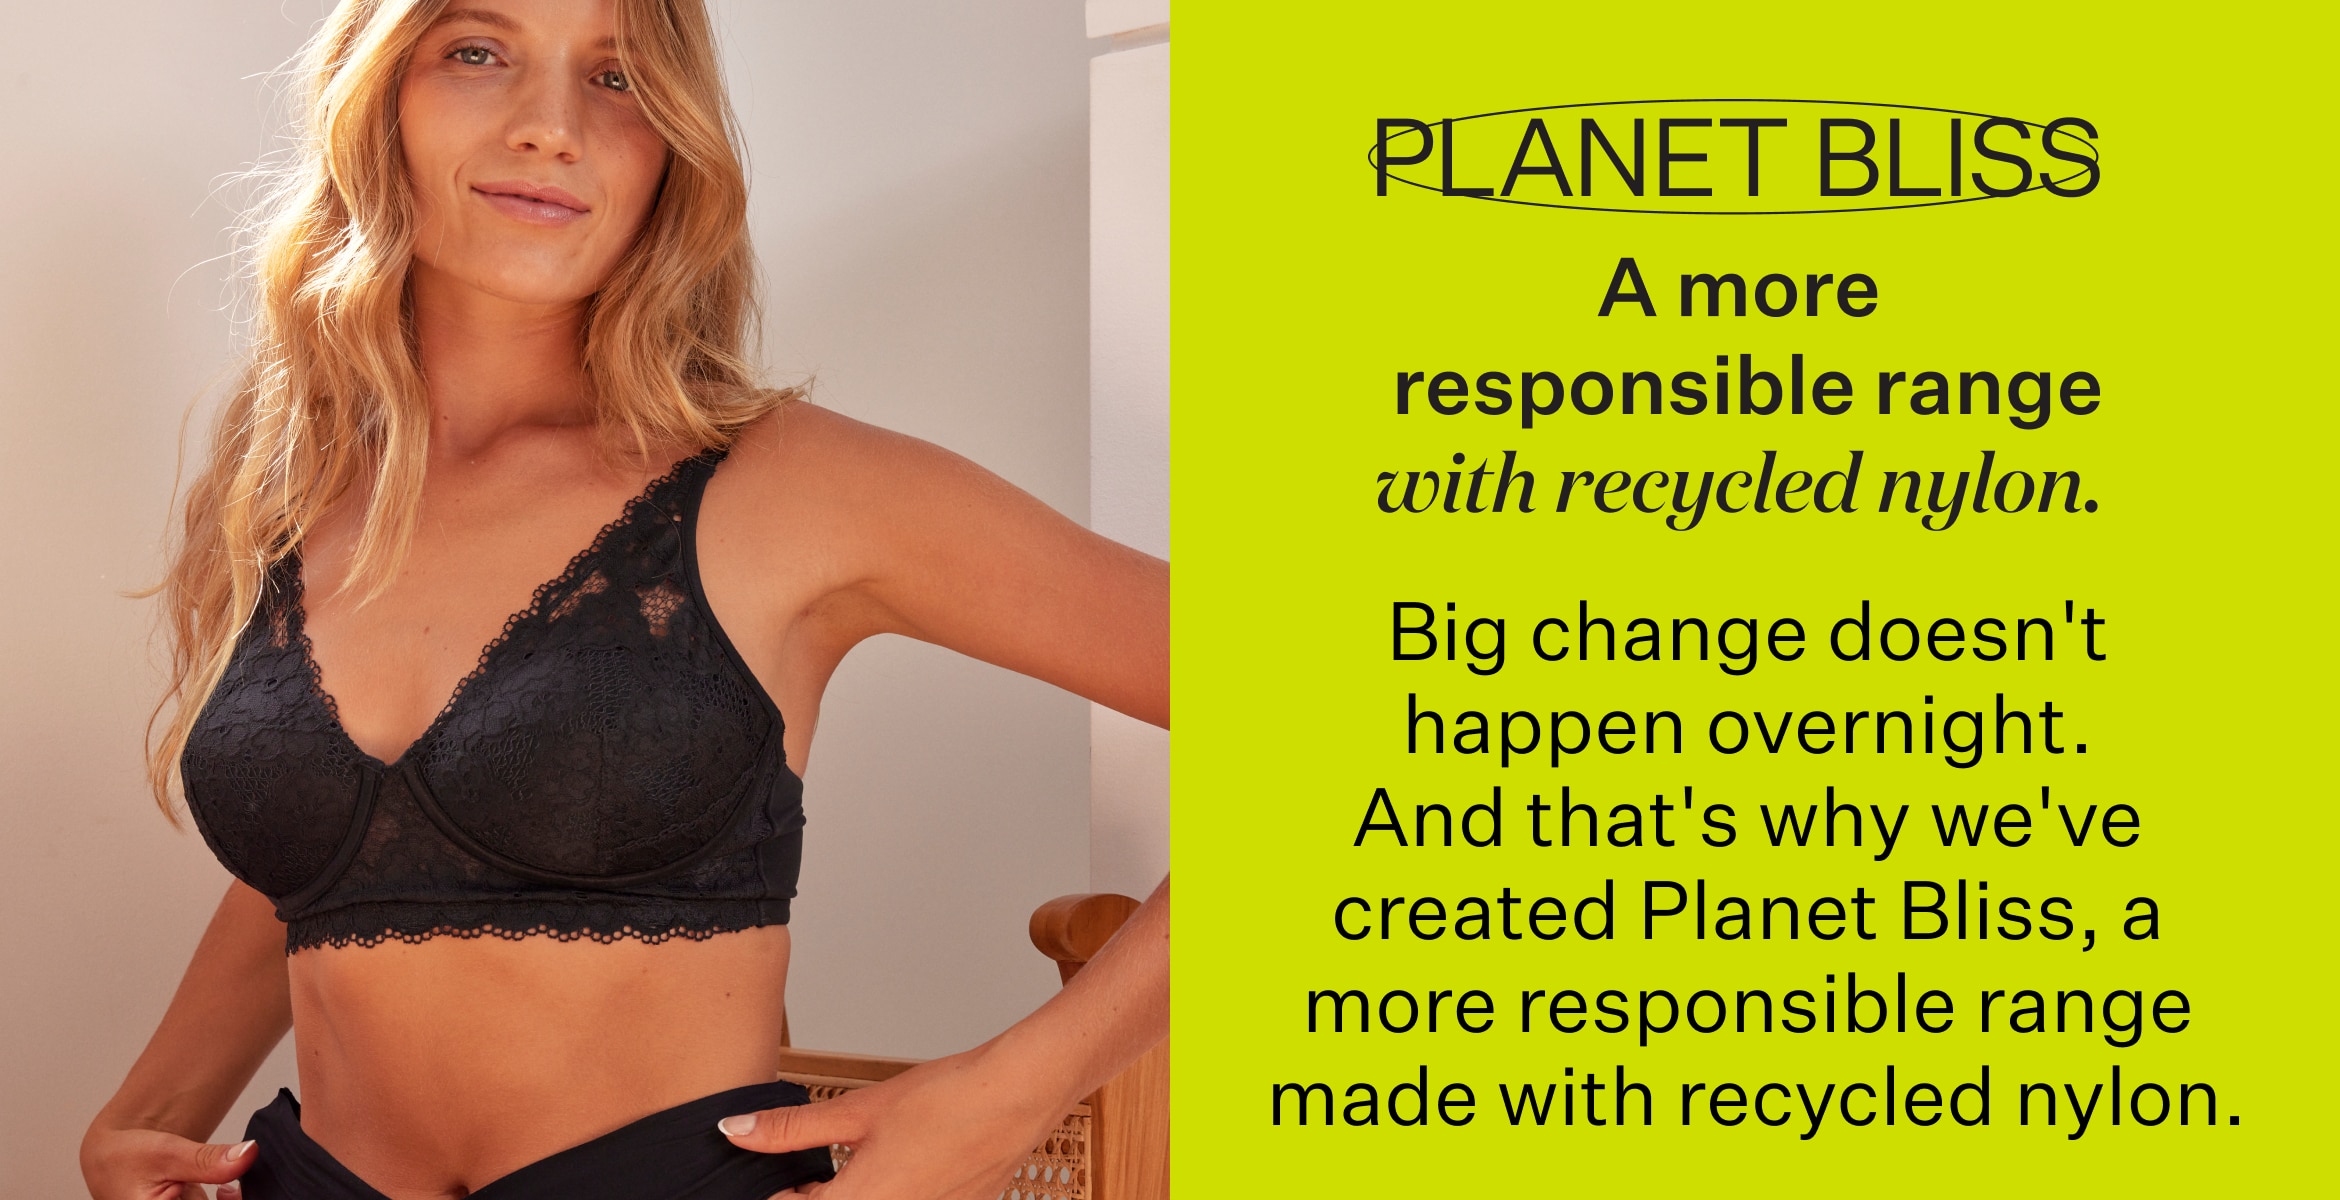 Planet Bliss. A more responsible range with recycled nylon. Big change doesn't happen overnight. And that's why we've created Planet Bliss.